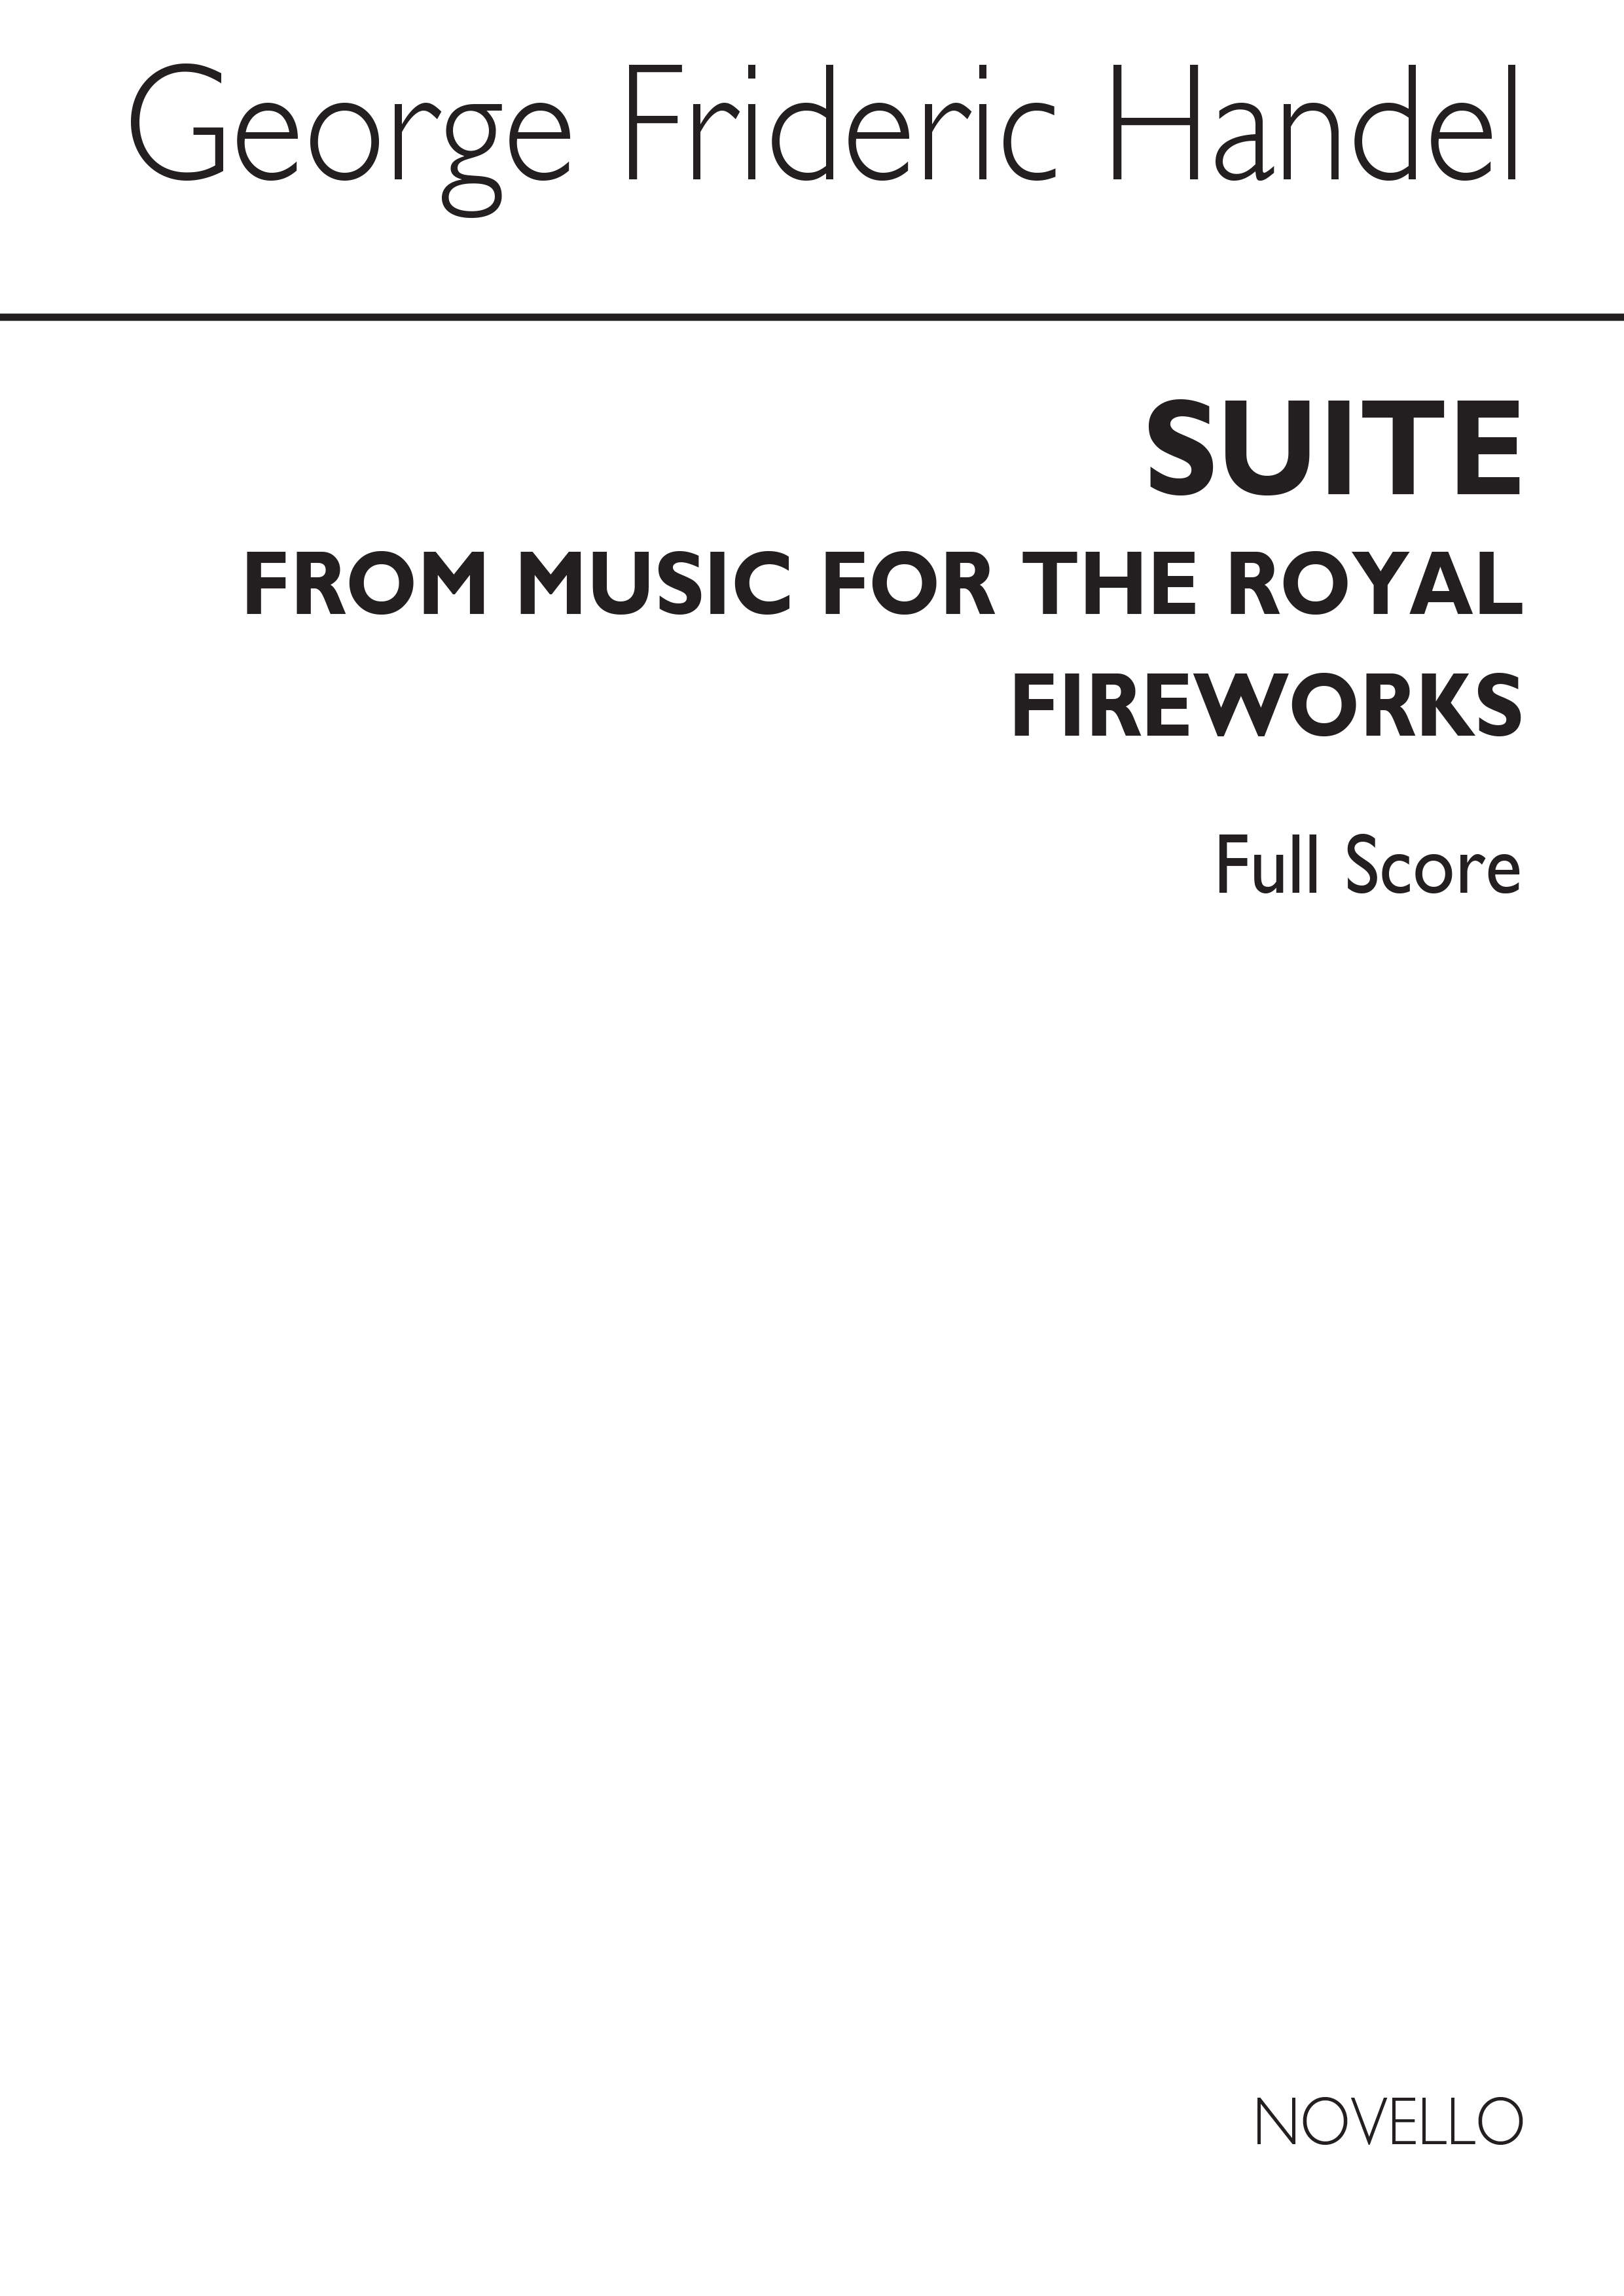 Georg Friedrich Hndel: Music For The Royal Fireworks: Orchestra: Score